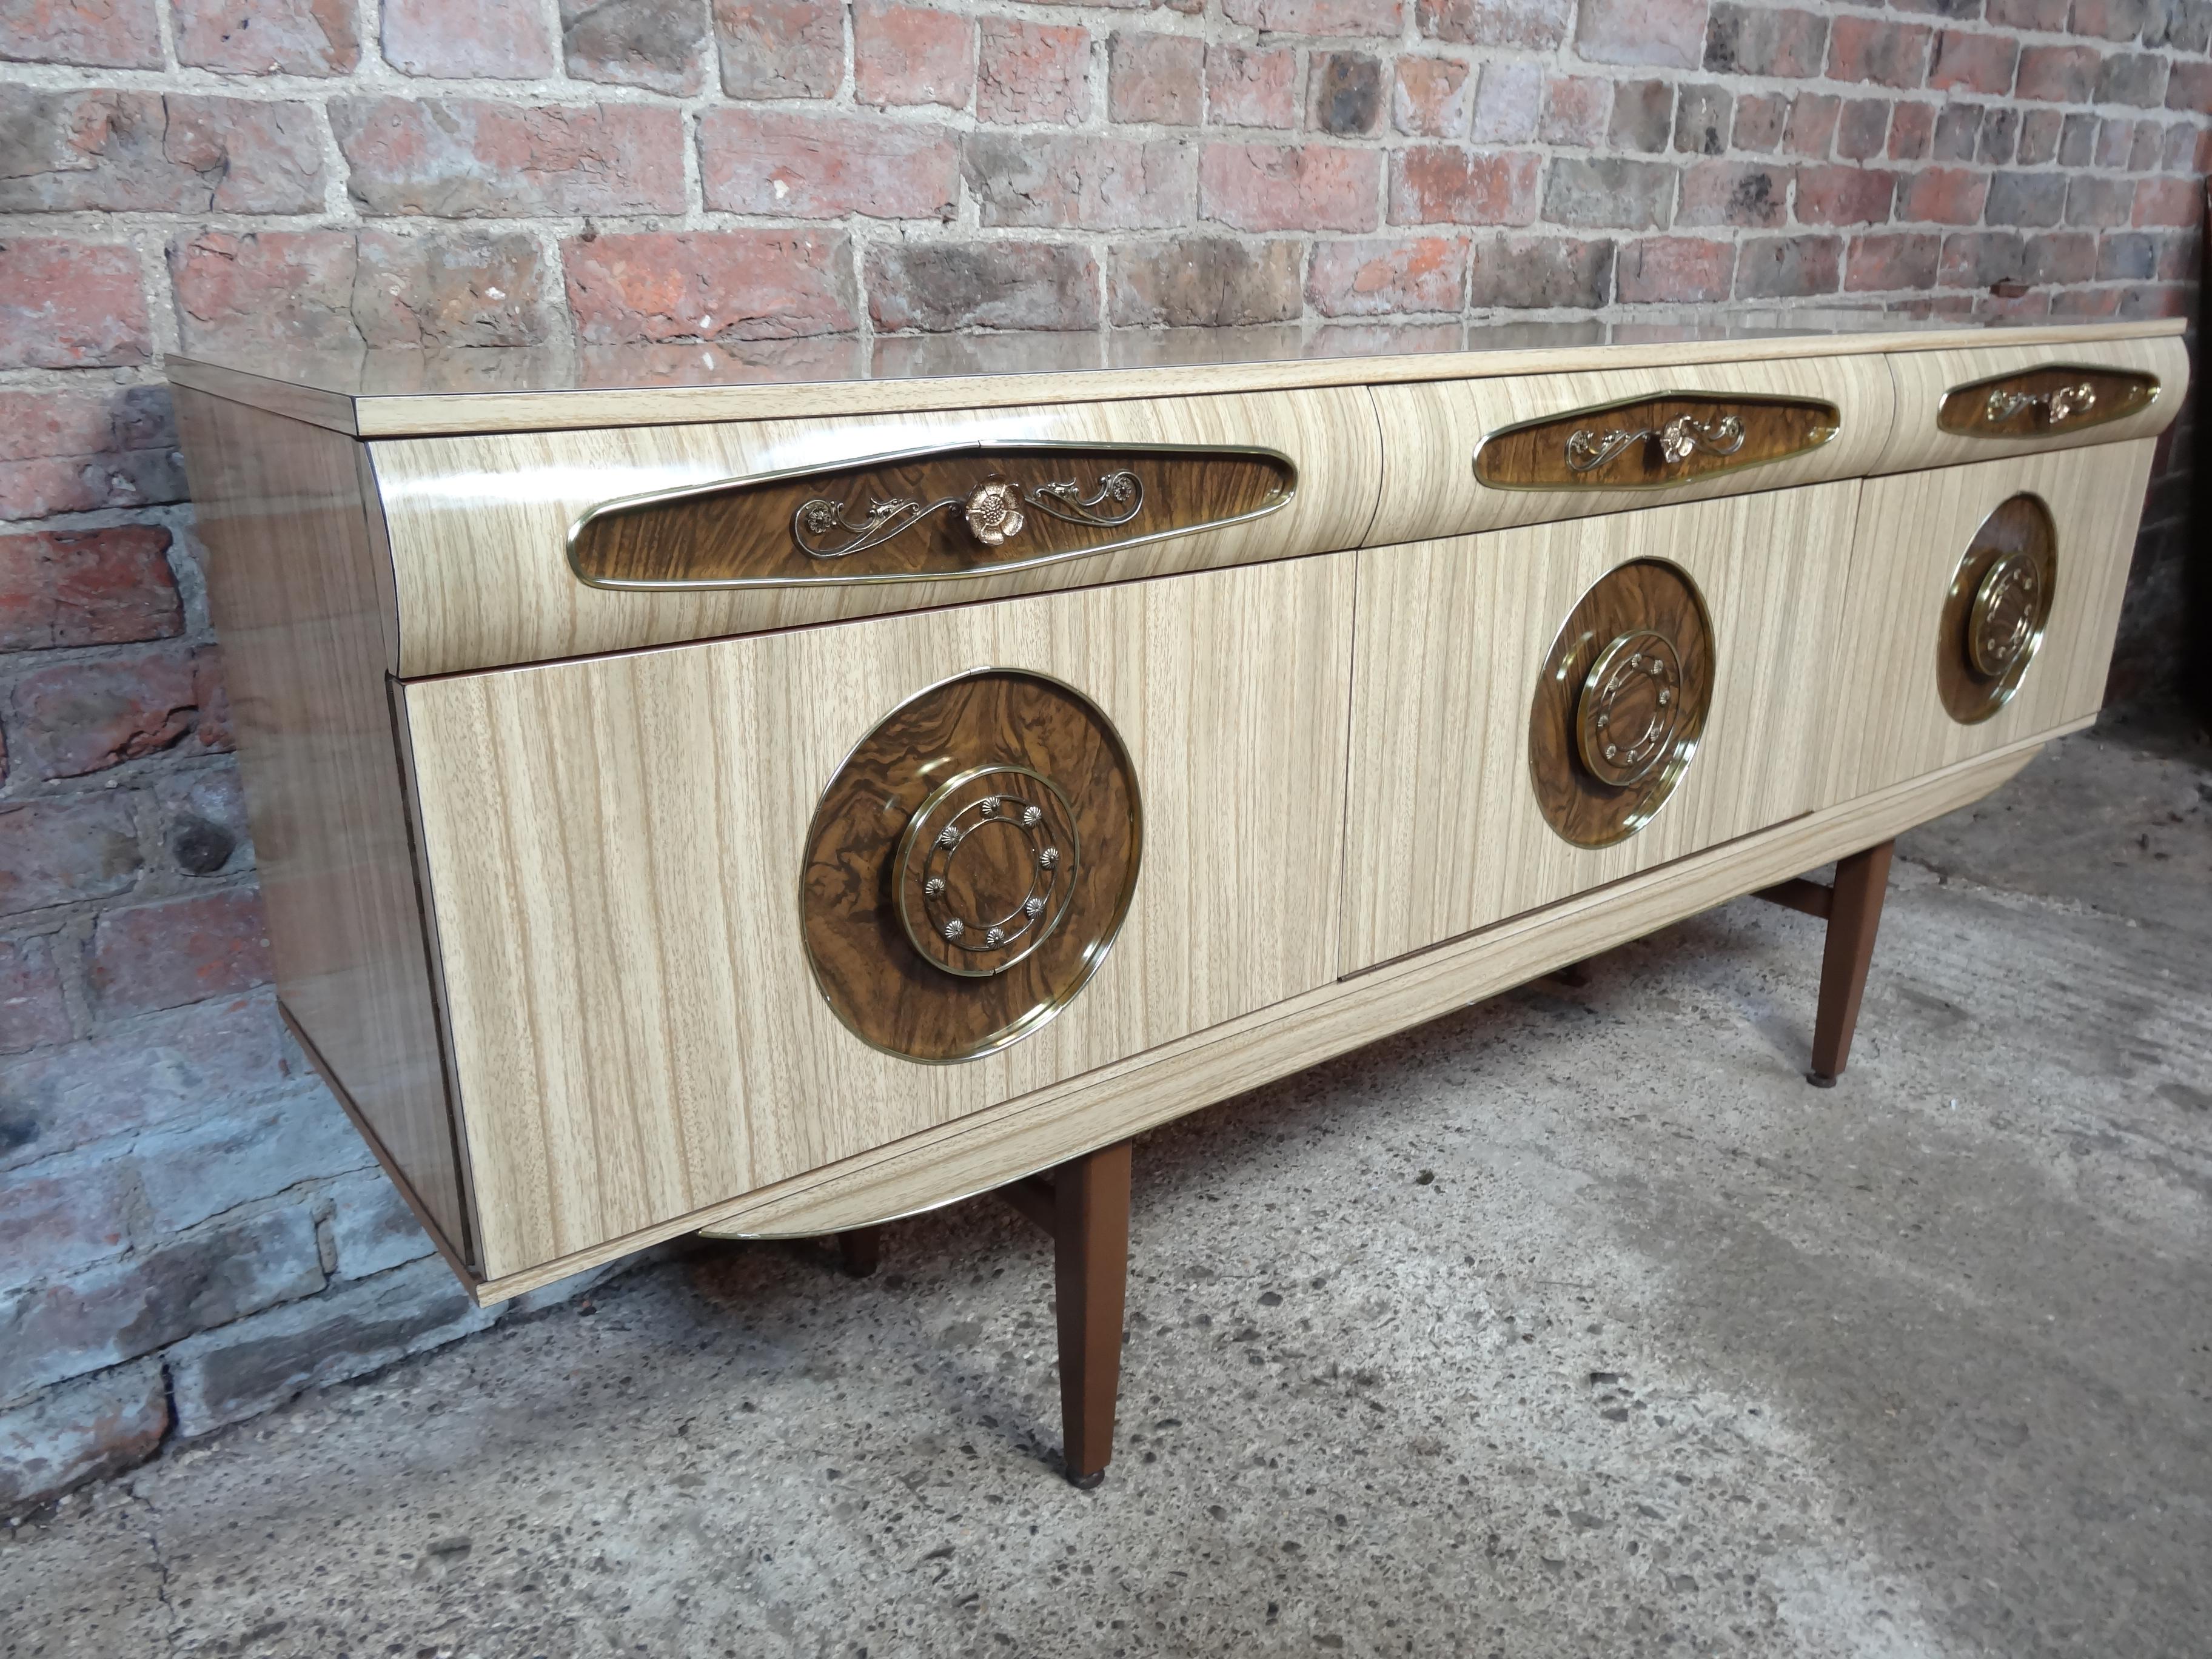 Mid-Century Modern Sought after Vintage Retro Italian Sideboard with Brass Handles from 1950s For Sale